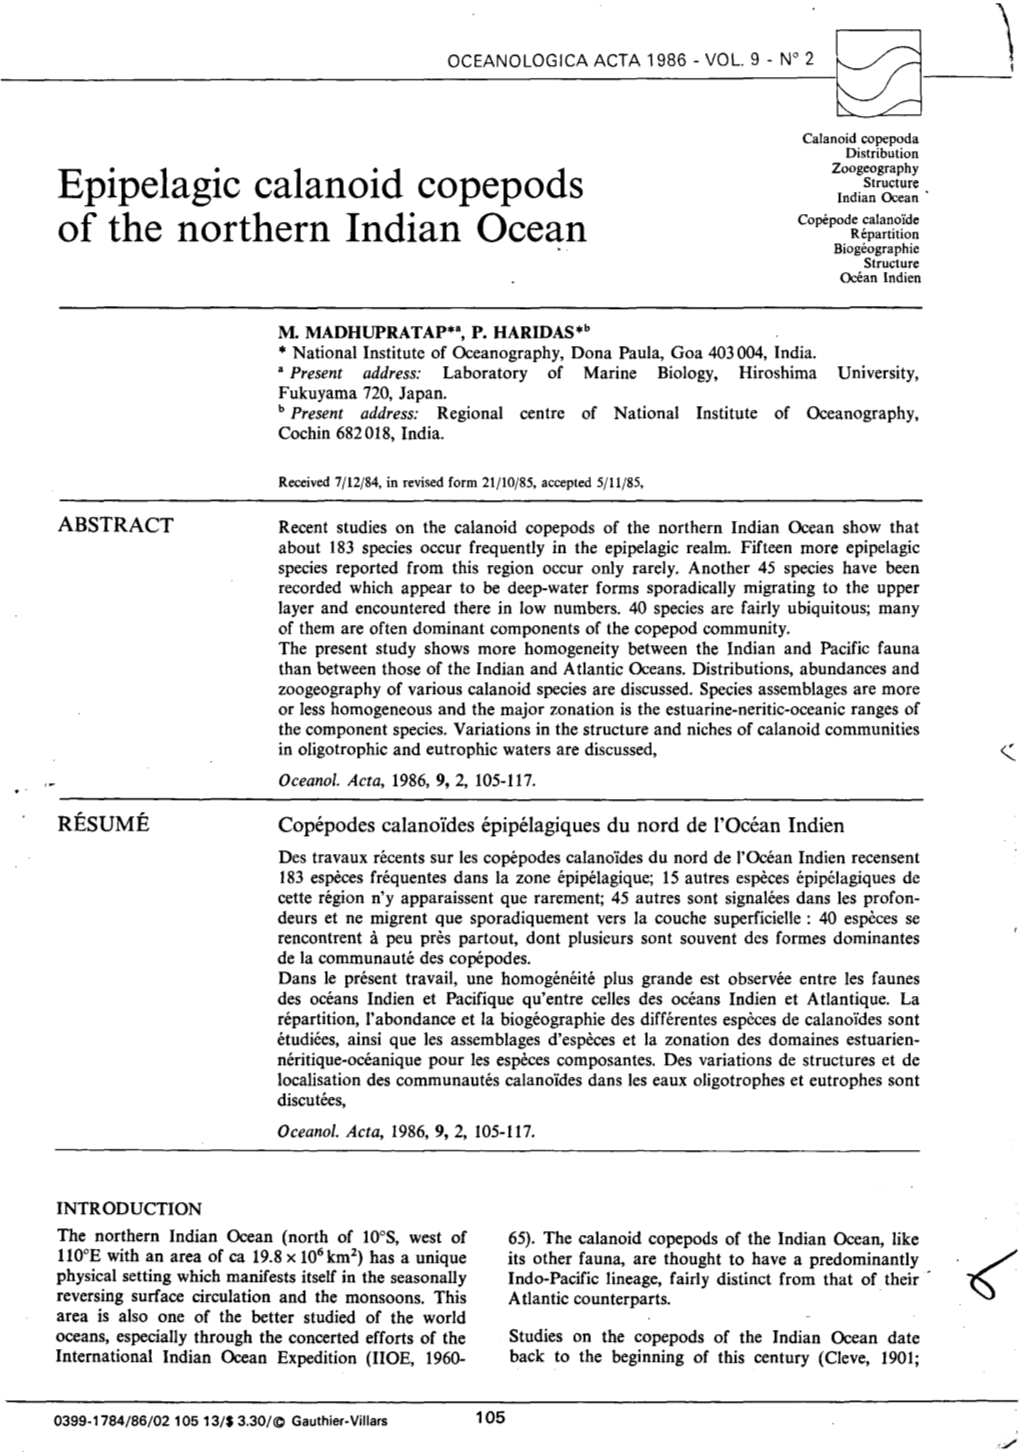 Epipelagic Calanoid Copepods of the Northern Indian Ocean